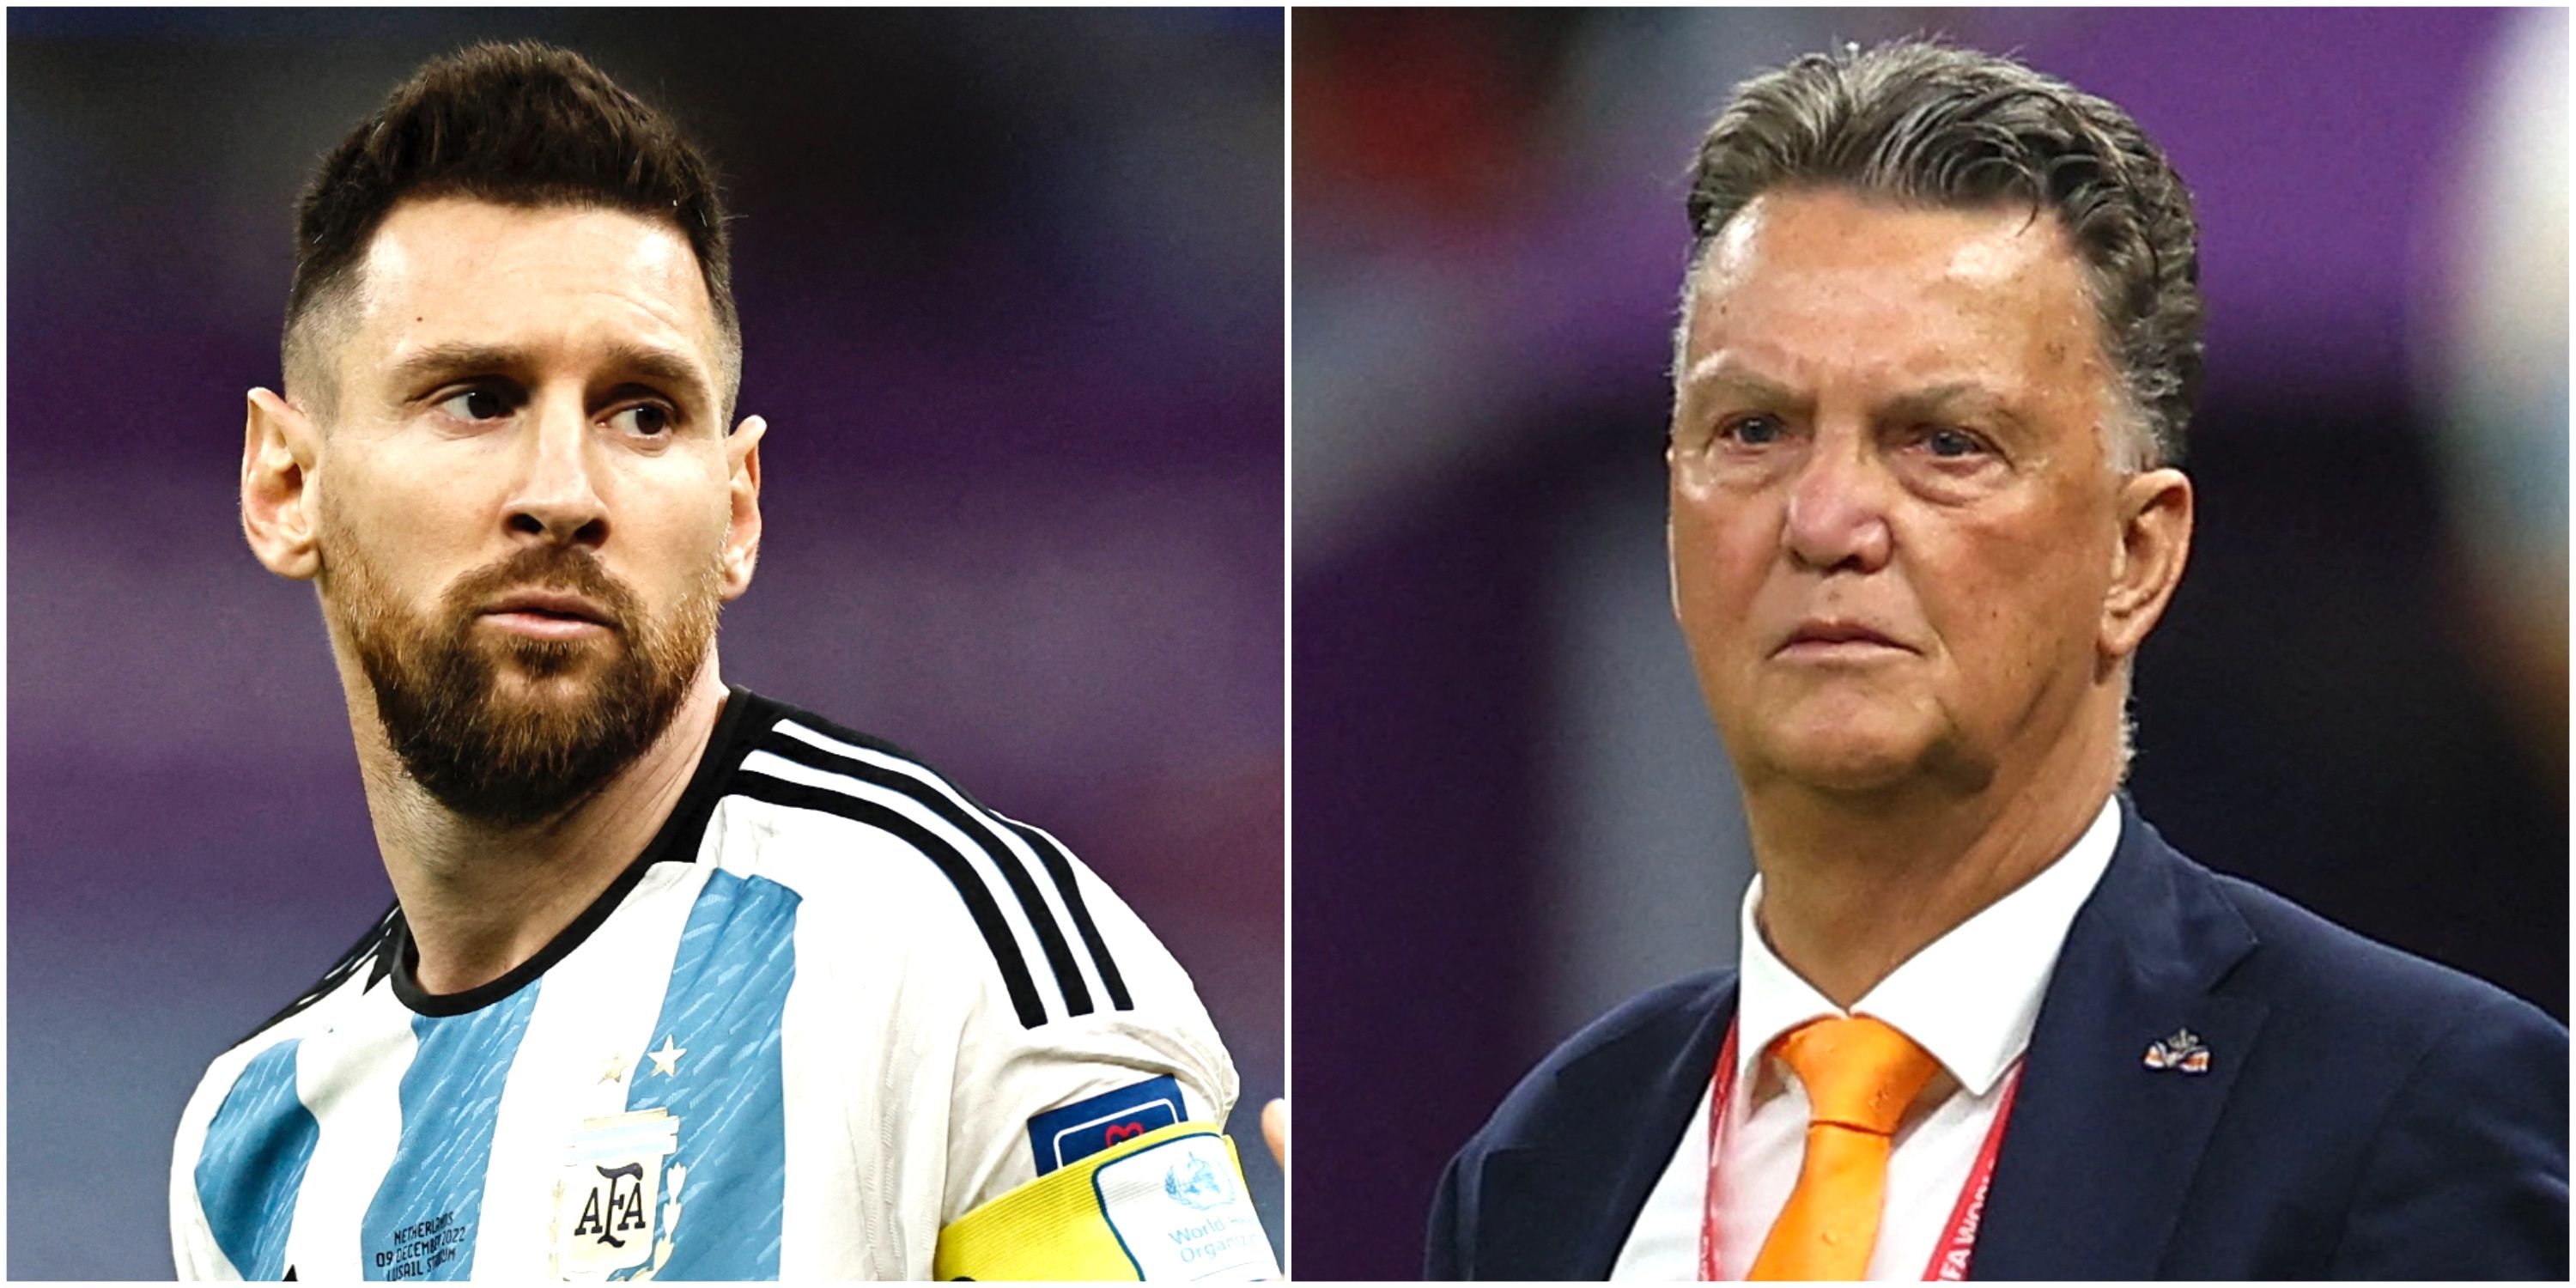 Louis van Gaal makes shock claim involving Lionel Messi and the 2022 World Cup